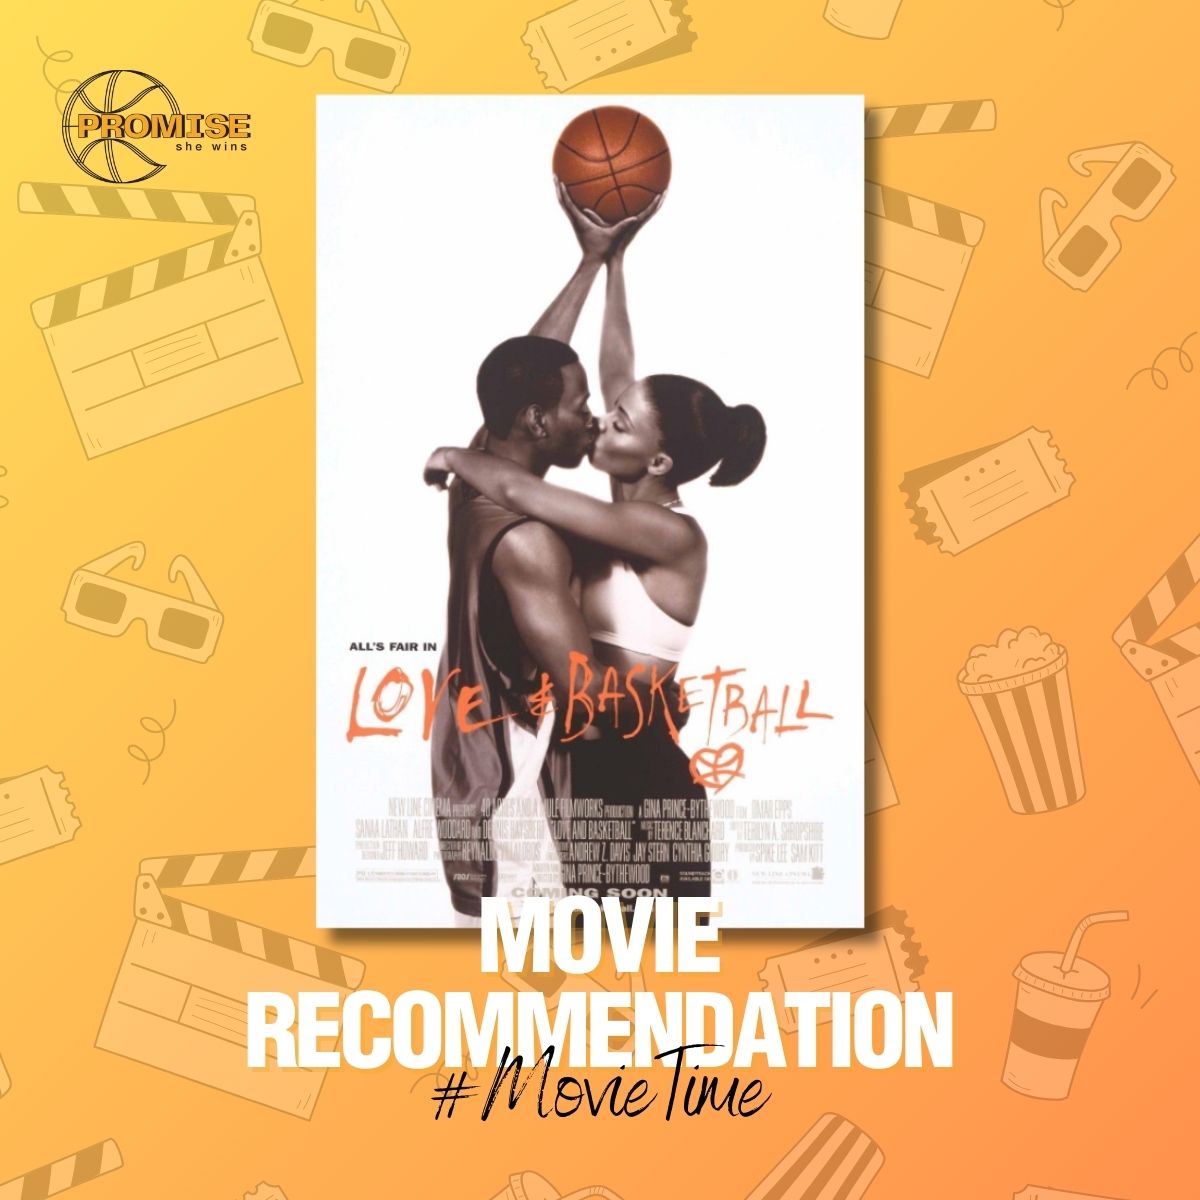 🏀 🌟 Movie Recommendation for Women's Basketball Enthusiasts!

🌟 Ready to be inspired by an incredible women's basketball journey?

🎬 Movie: 'Love & Basketball' (2000)

#PROMISE #dunkthestigma #promisebasketball